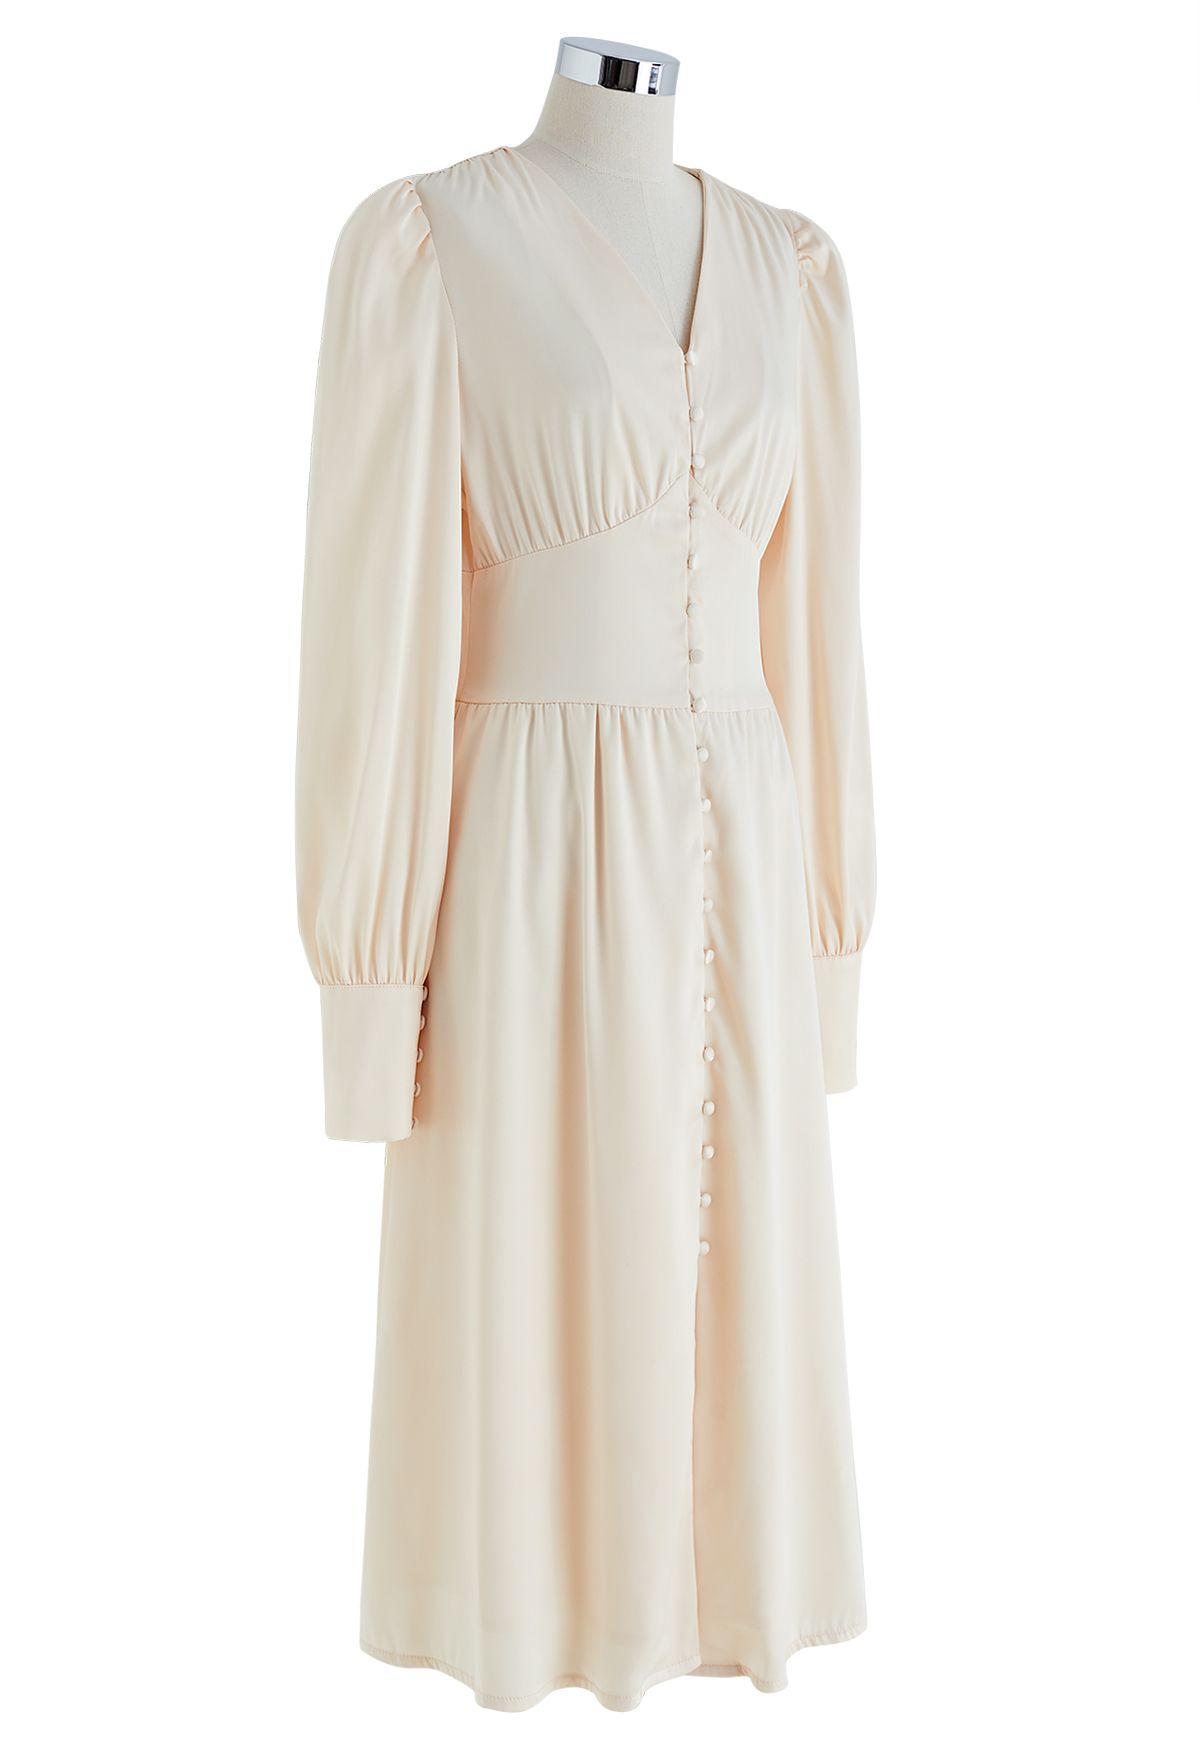 Puff Sleeves Button Up Satin Midi Dress in Cream